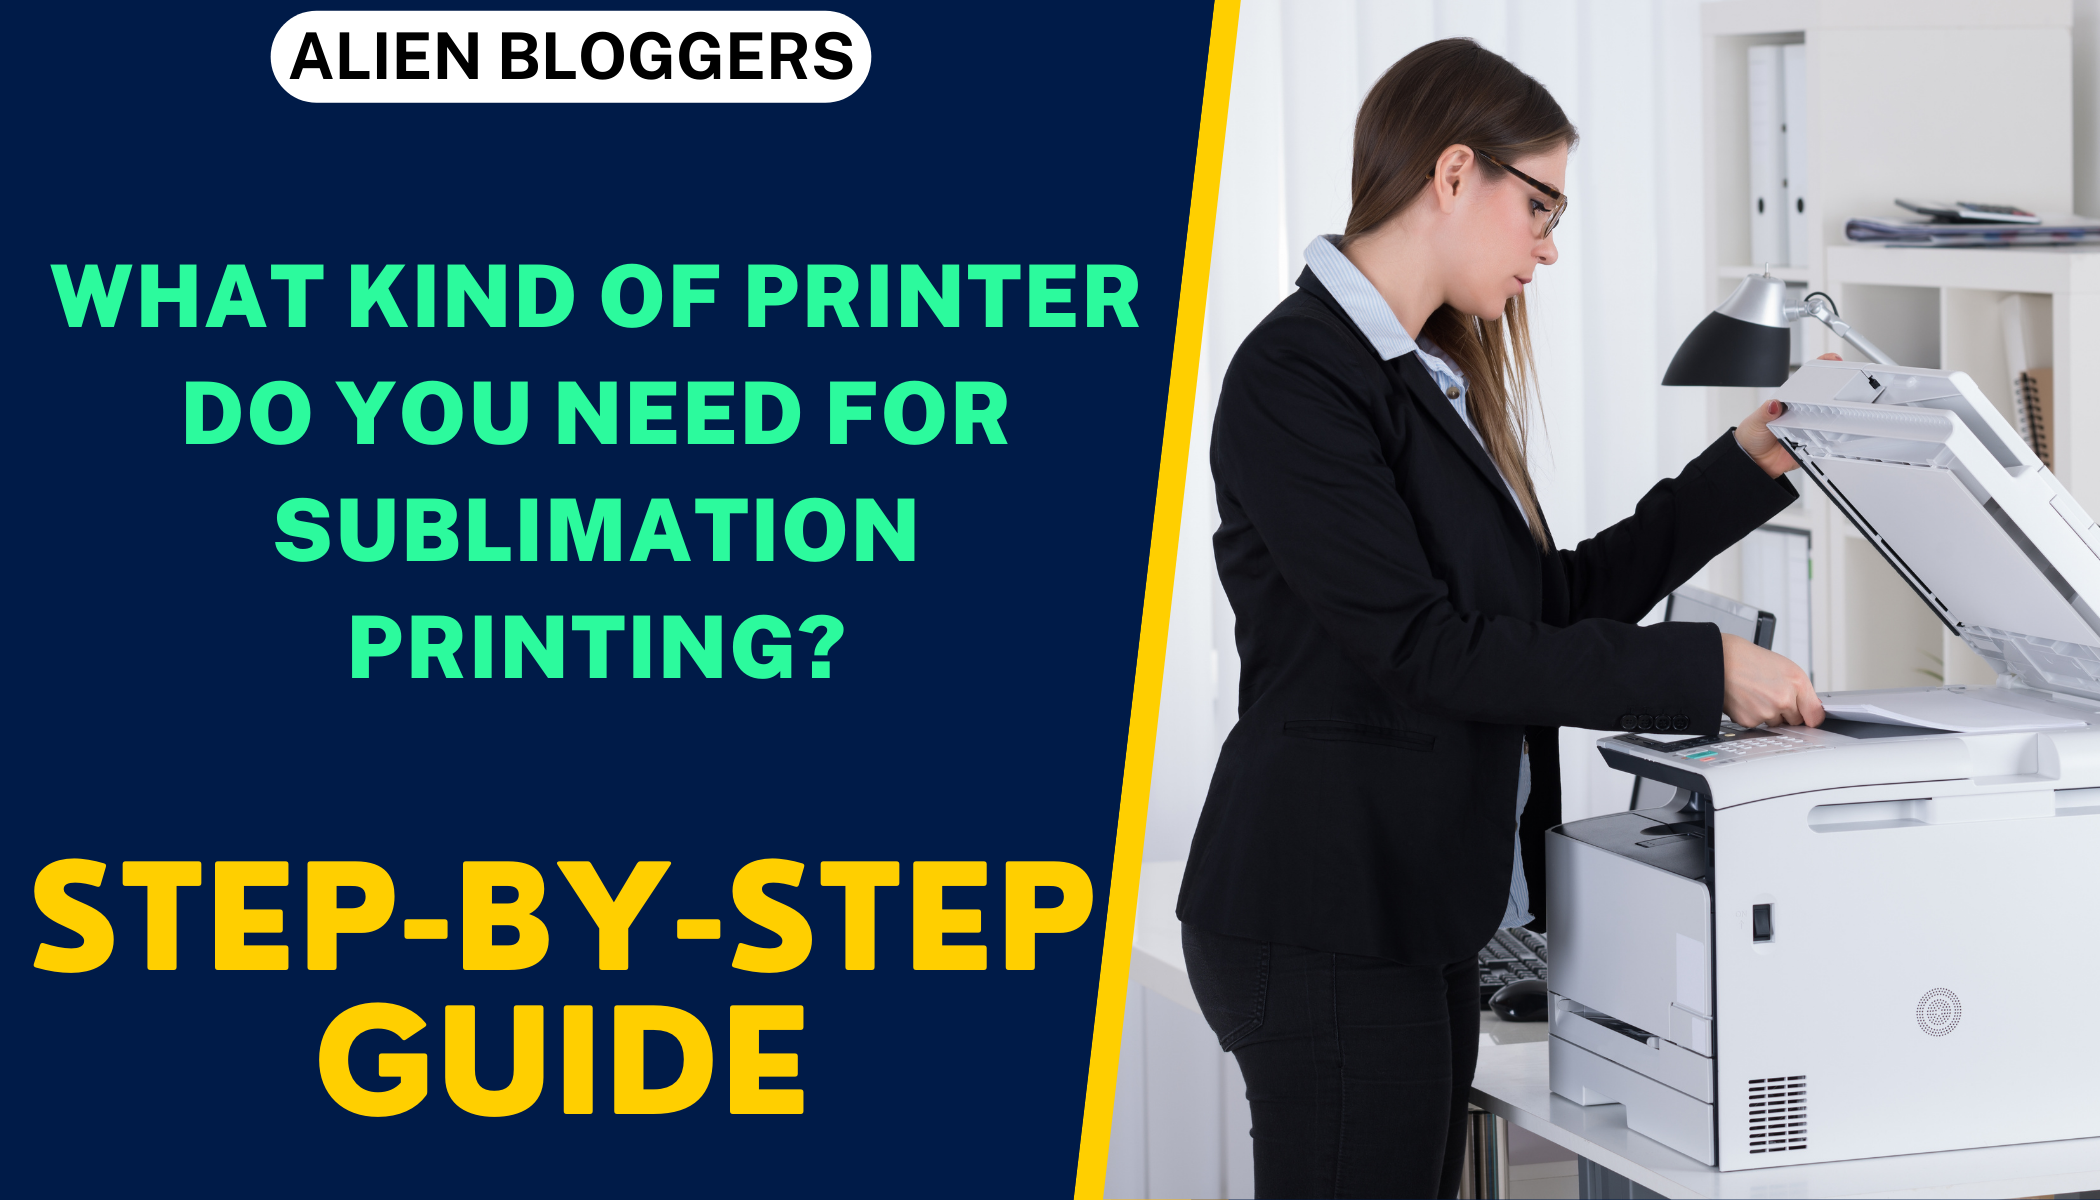 What Kind of Printer Do You Need For Sublimation Printing?